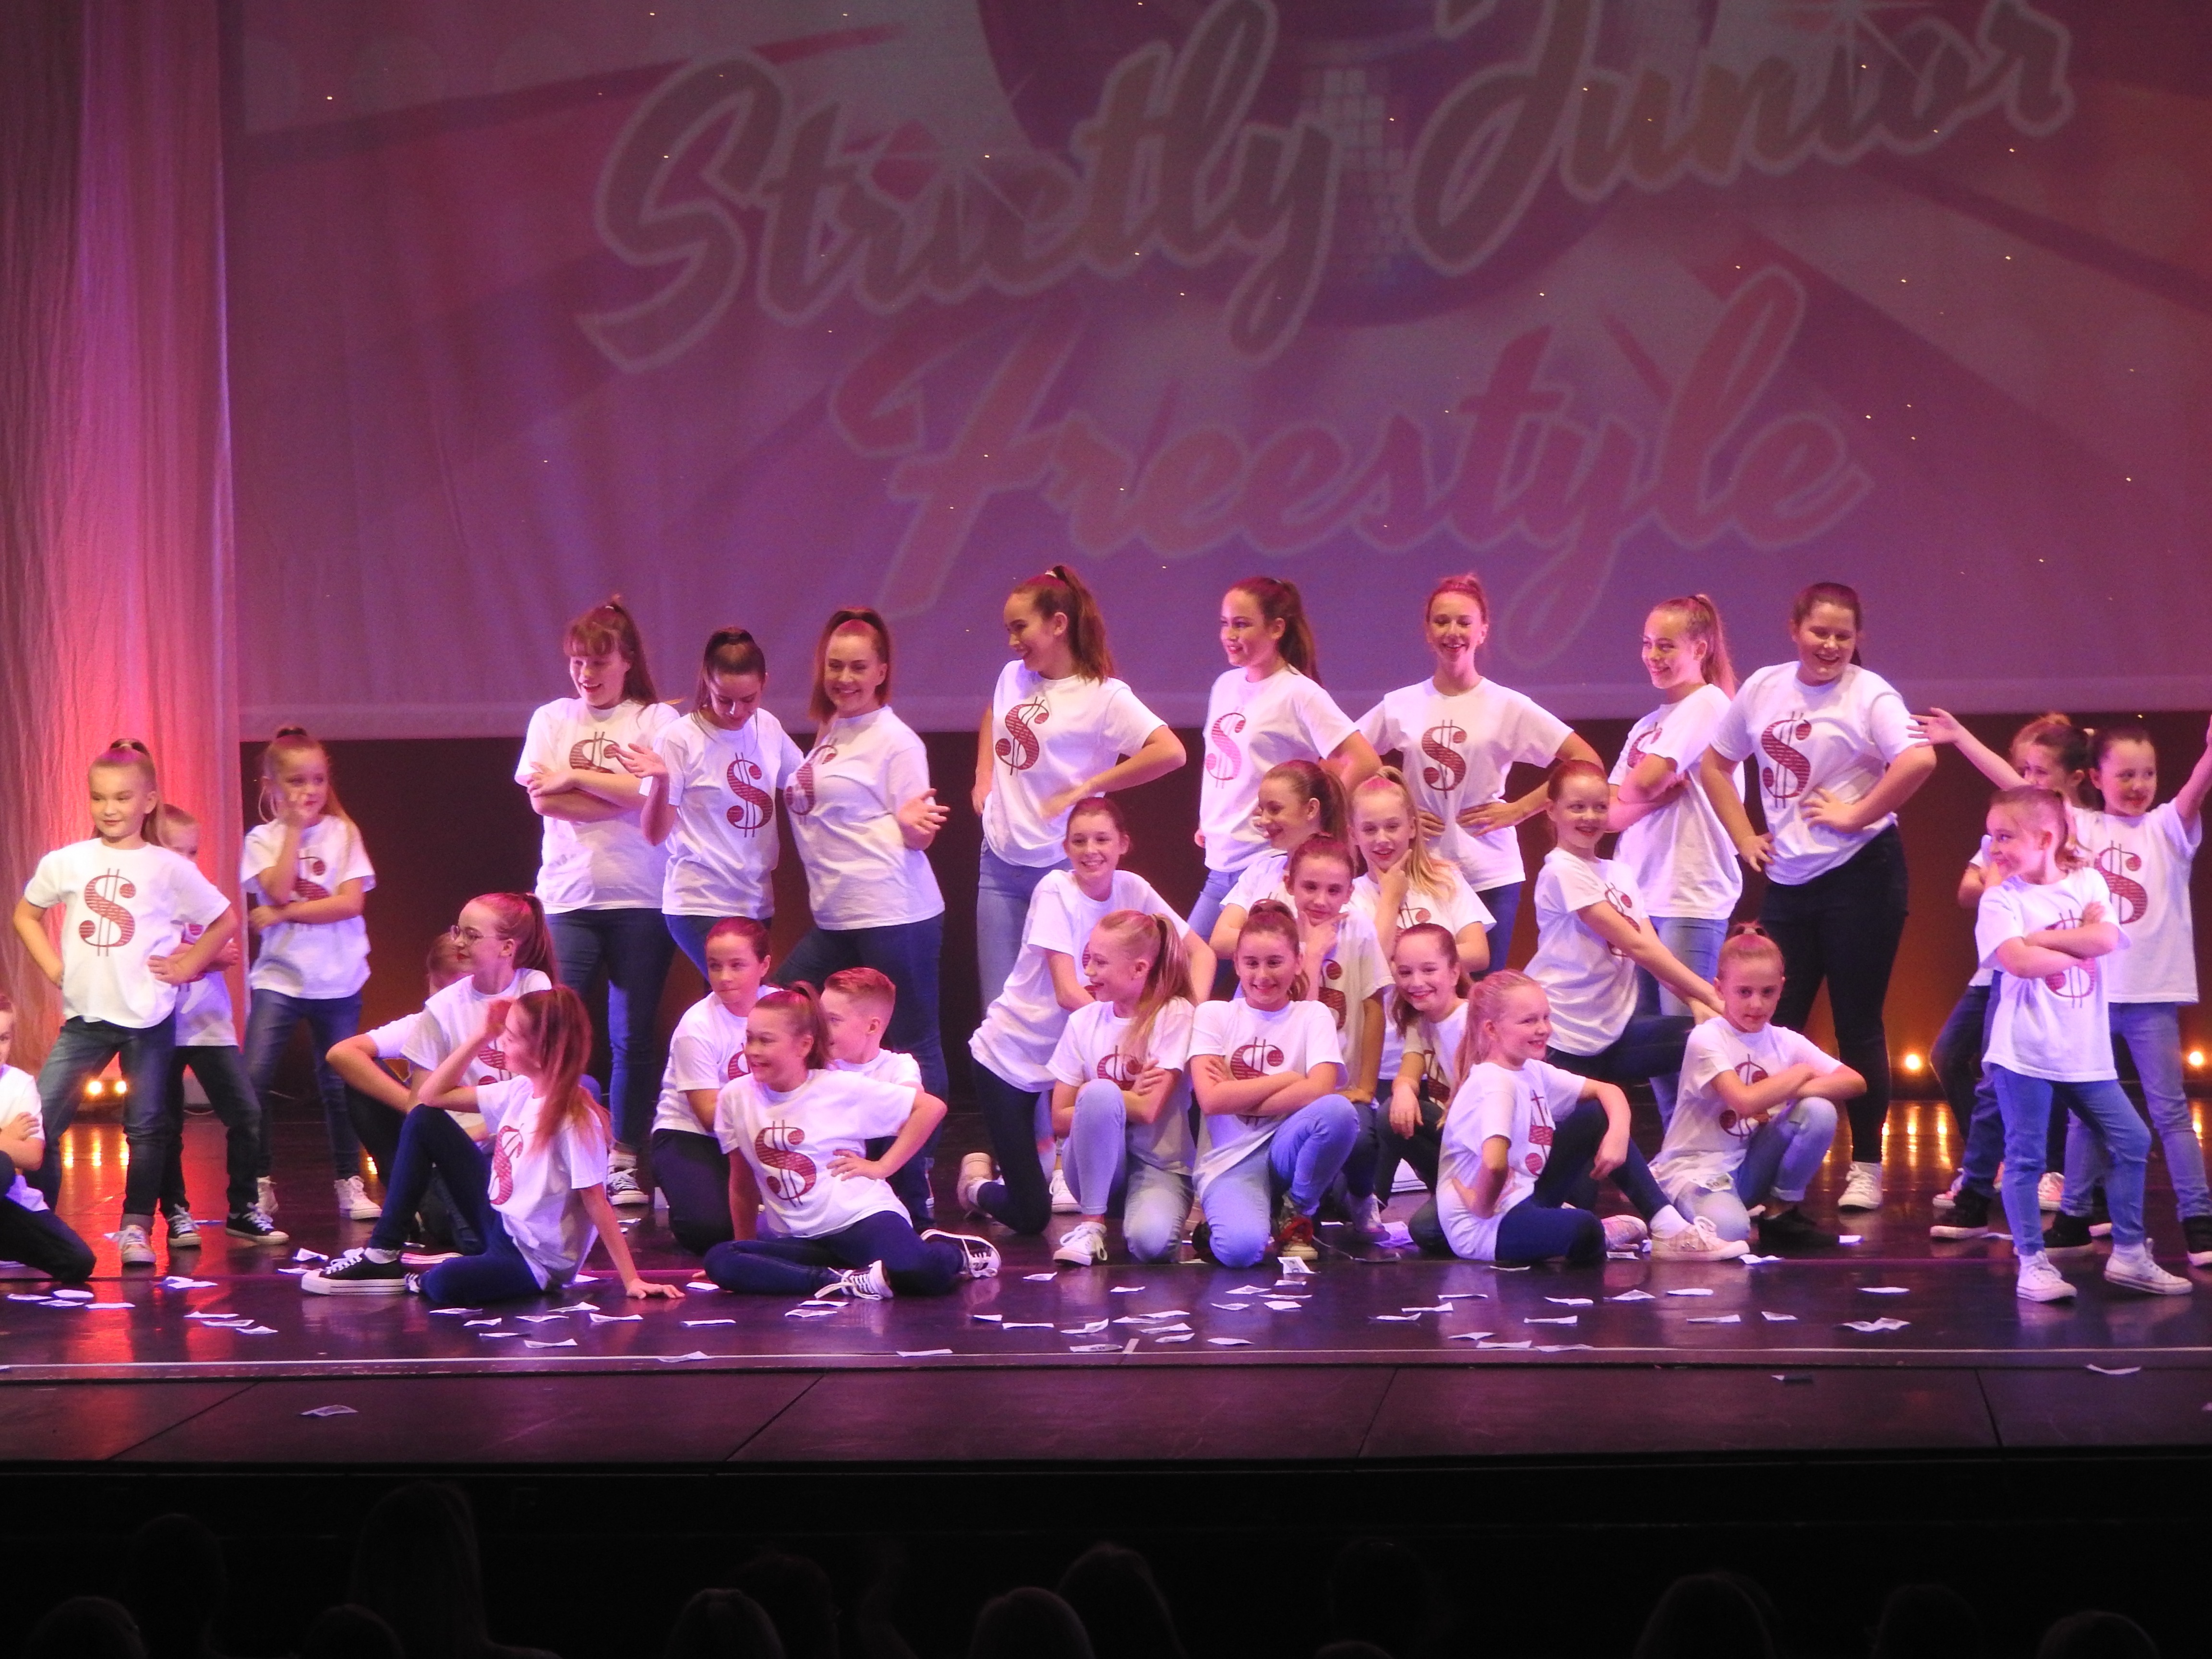 evolution dance strictly junior freestyle winners